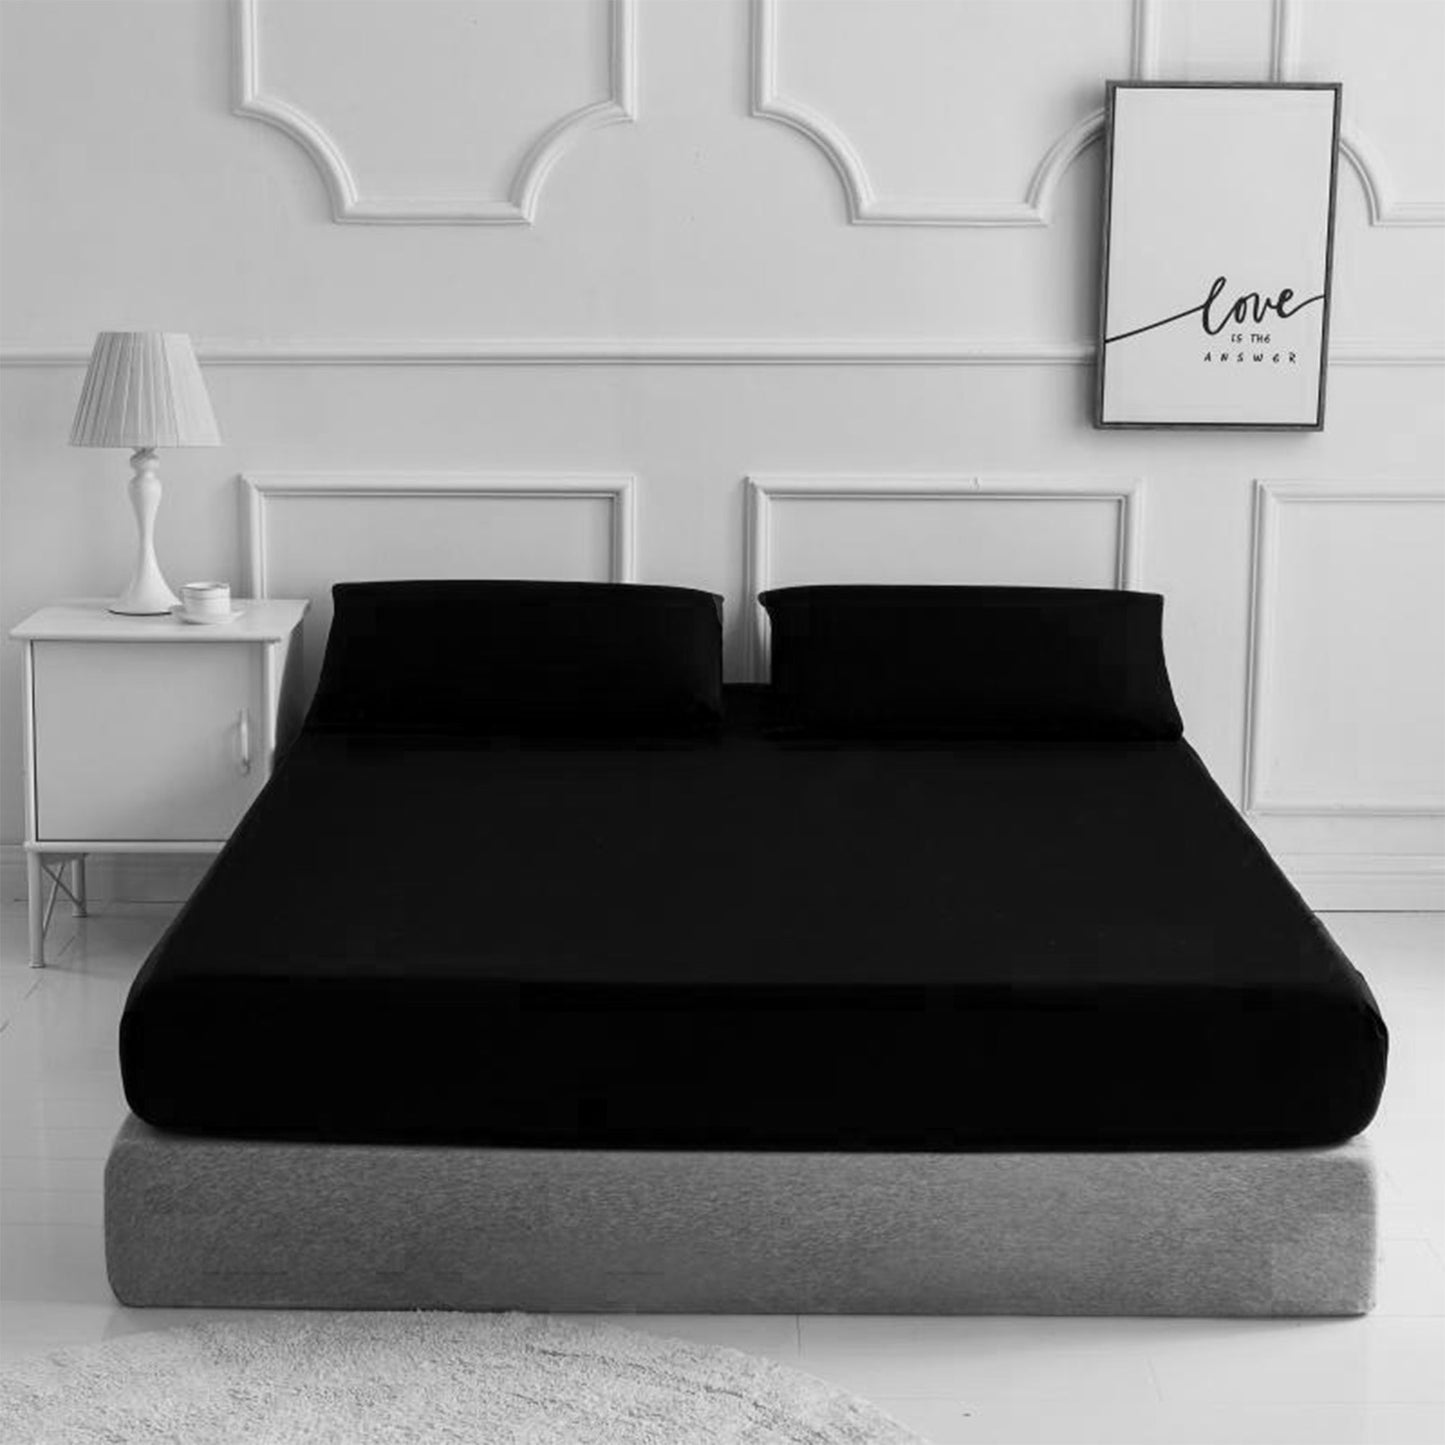 Fitted Bed Sheet Matching FREE 2 X PILLOW CASE Plain Dyed - TheComfortshop.co.ukBed Sheets0721718963592thecomfortshopTheComfortshop.co.ukPC FIT FREE PP Black KingBlackKingFitted Bed Sheet Matching FREE 2 X PILLOW CASE Plain Dyed - TheComfortshop.co.uk